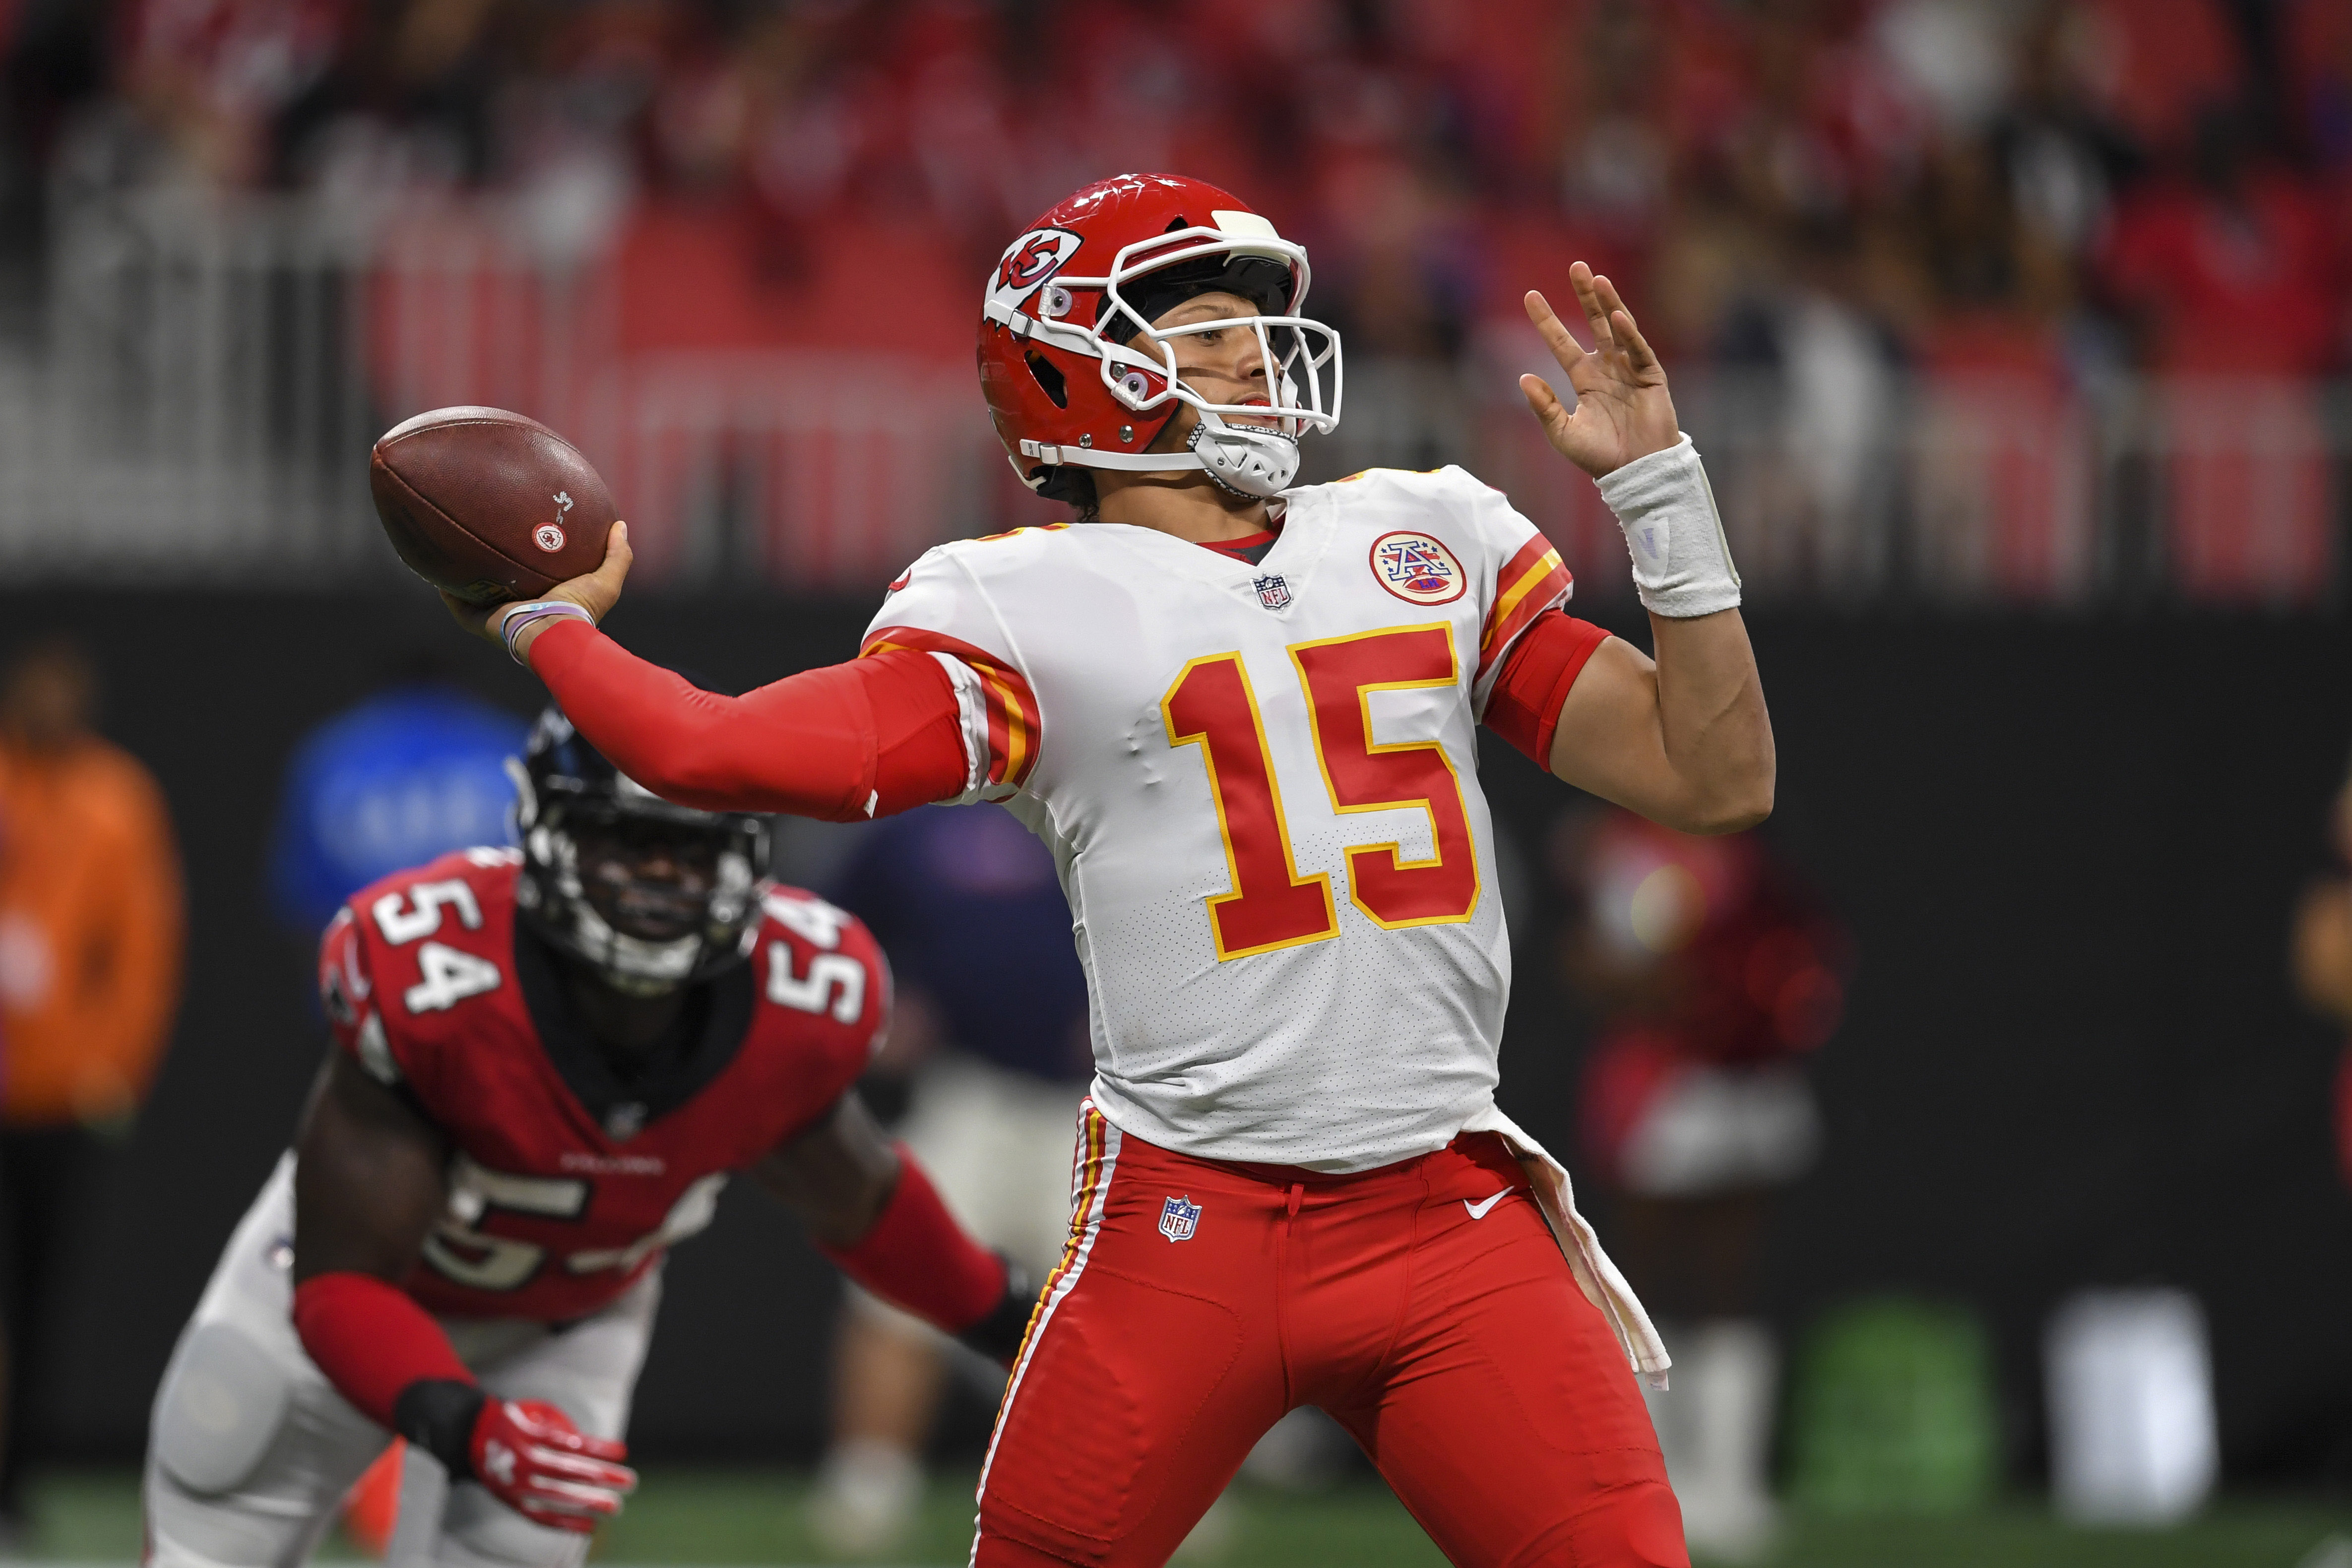 Every Chiefs starting QB from Todd Blackledge to Patrick Mahomes